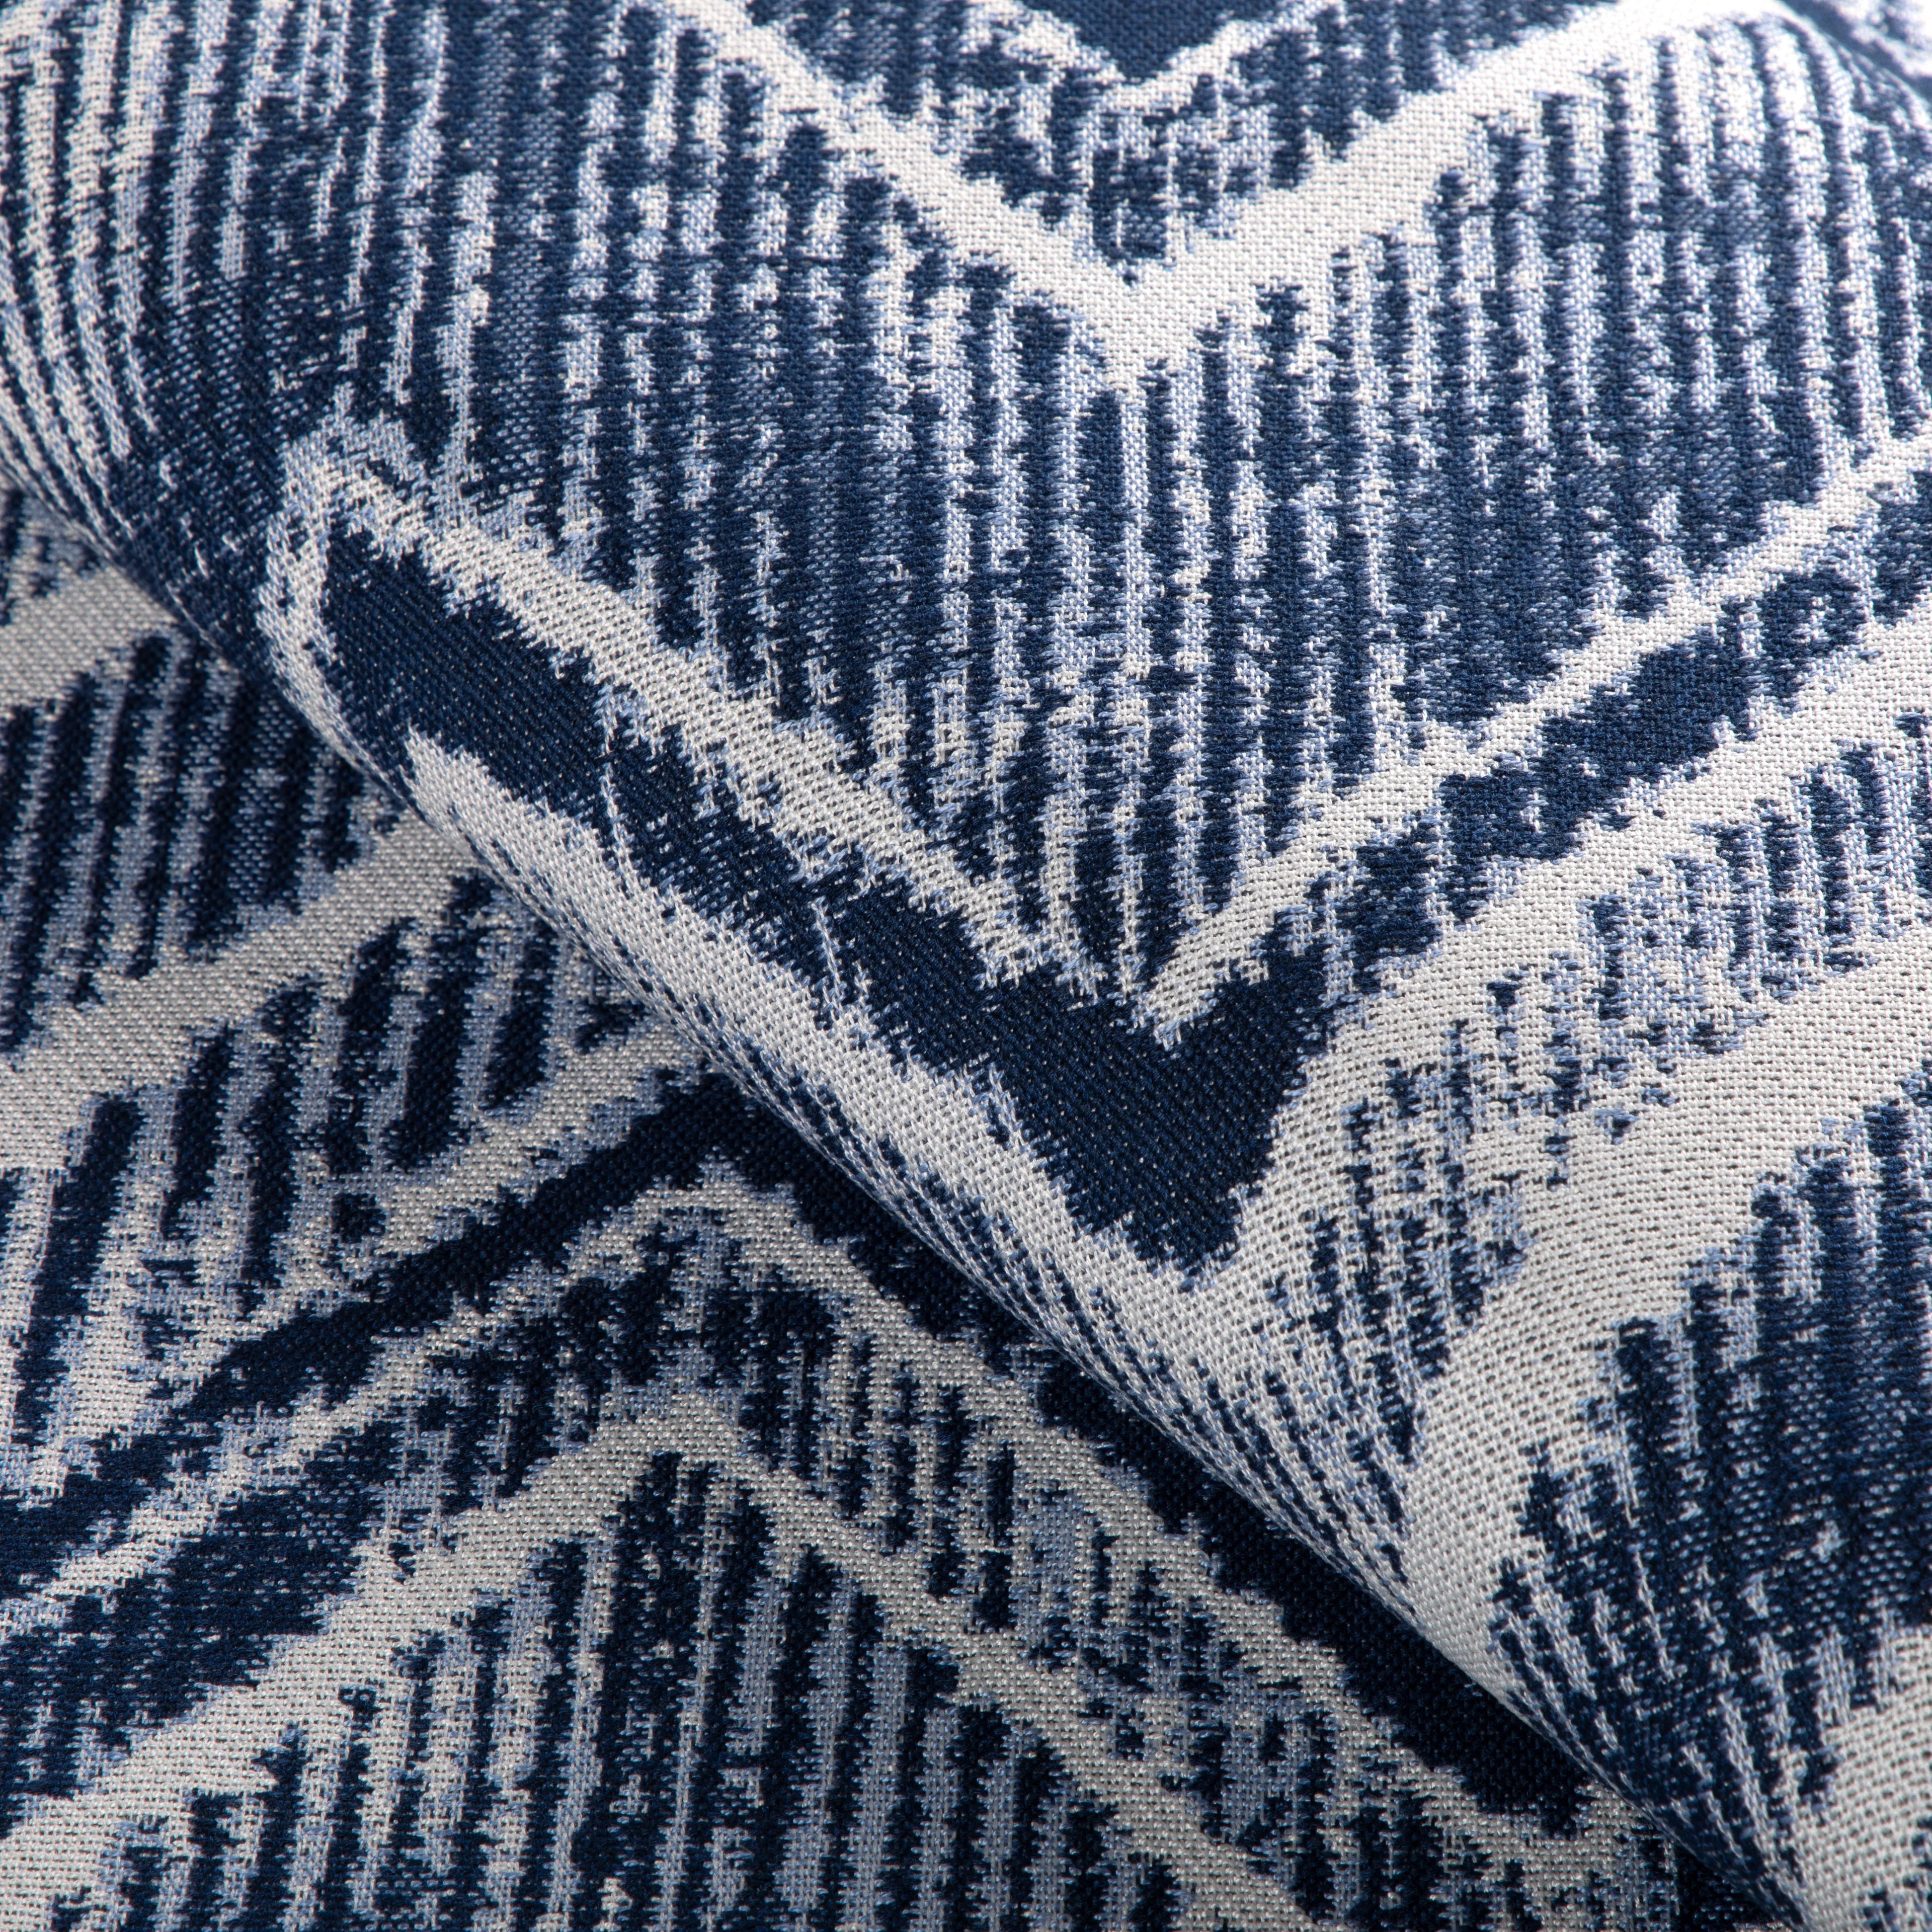 Alternate view of Riviera Batik fabric in marine color - pattern 36934.51.0 - by Kravet Couture in the Riviera collection